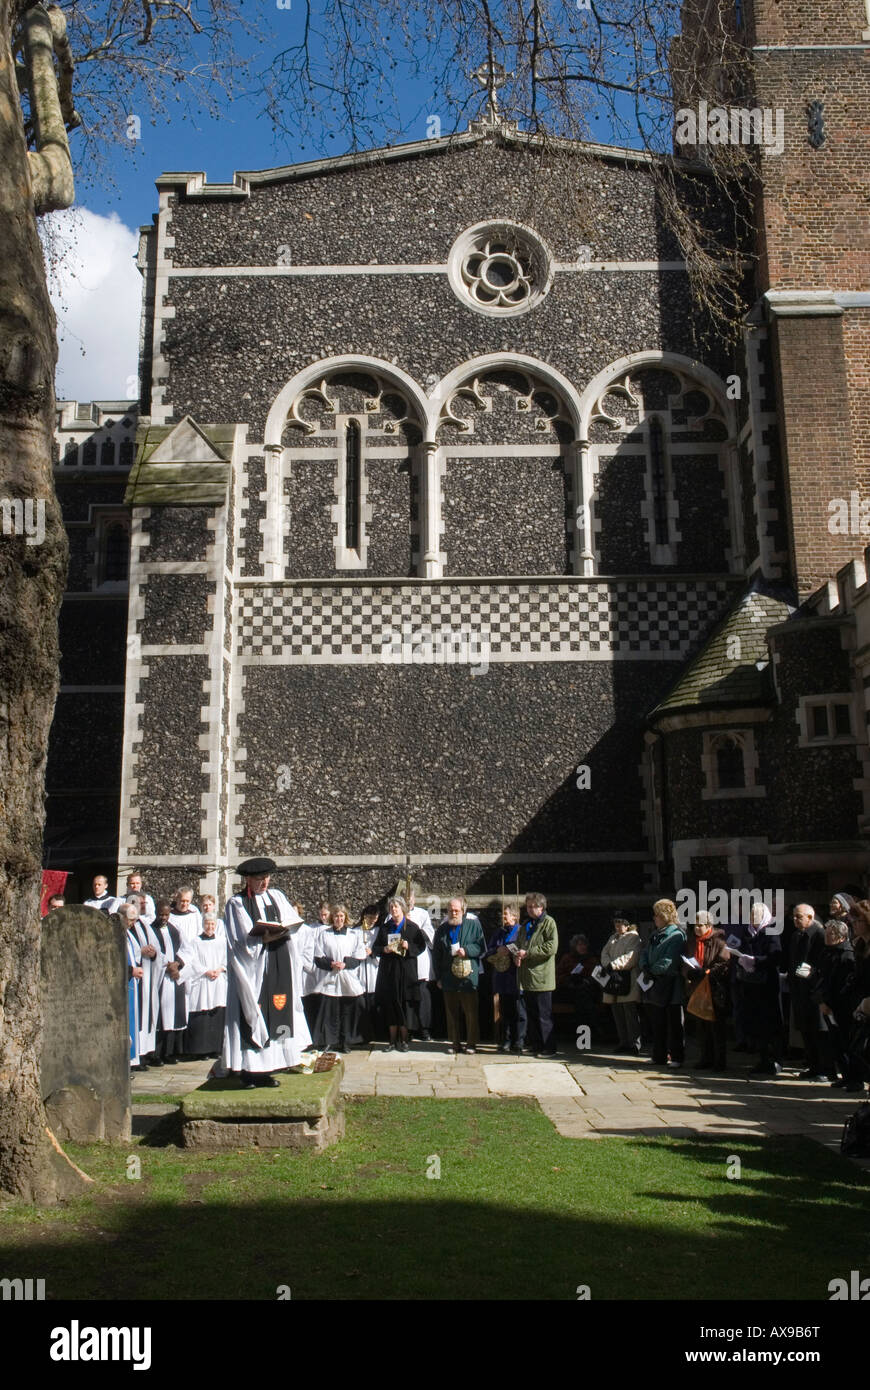 Butterworth Charity Easter Good Friday Priory Church of St Bartholomews the Great London UK 2008 Sermon standing  on a gravestone slab. Stock Photo